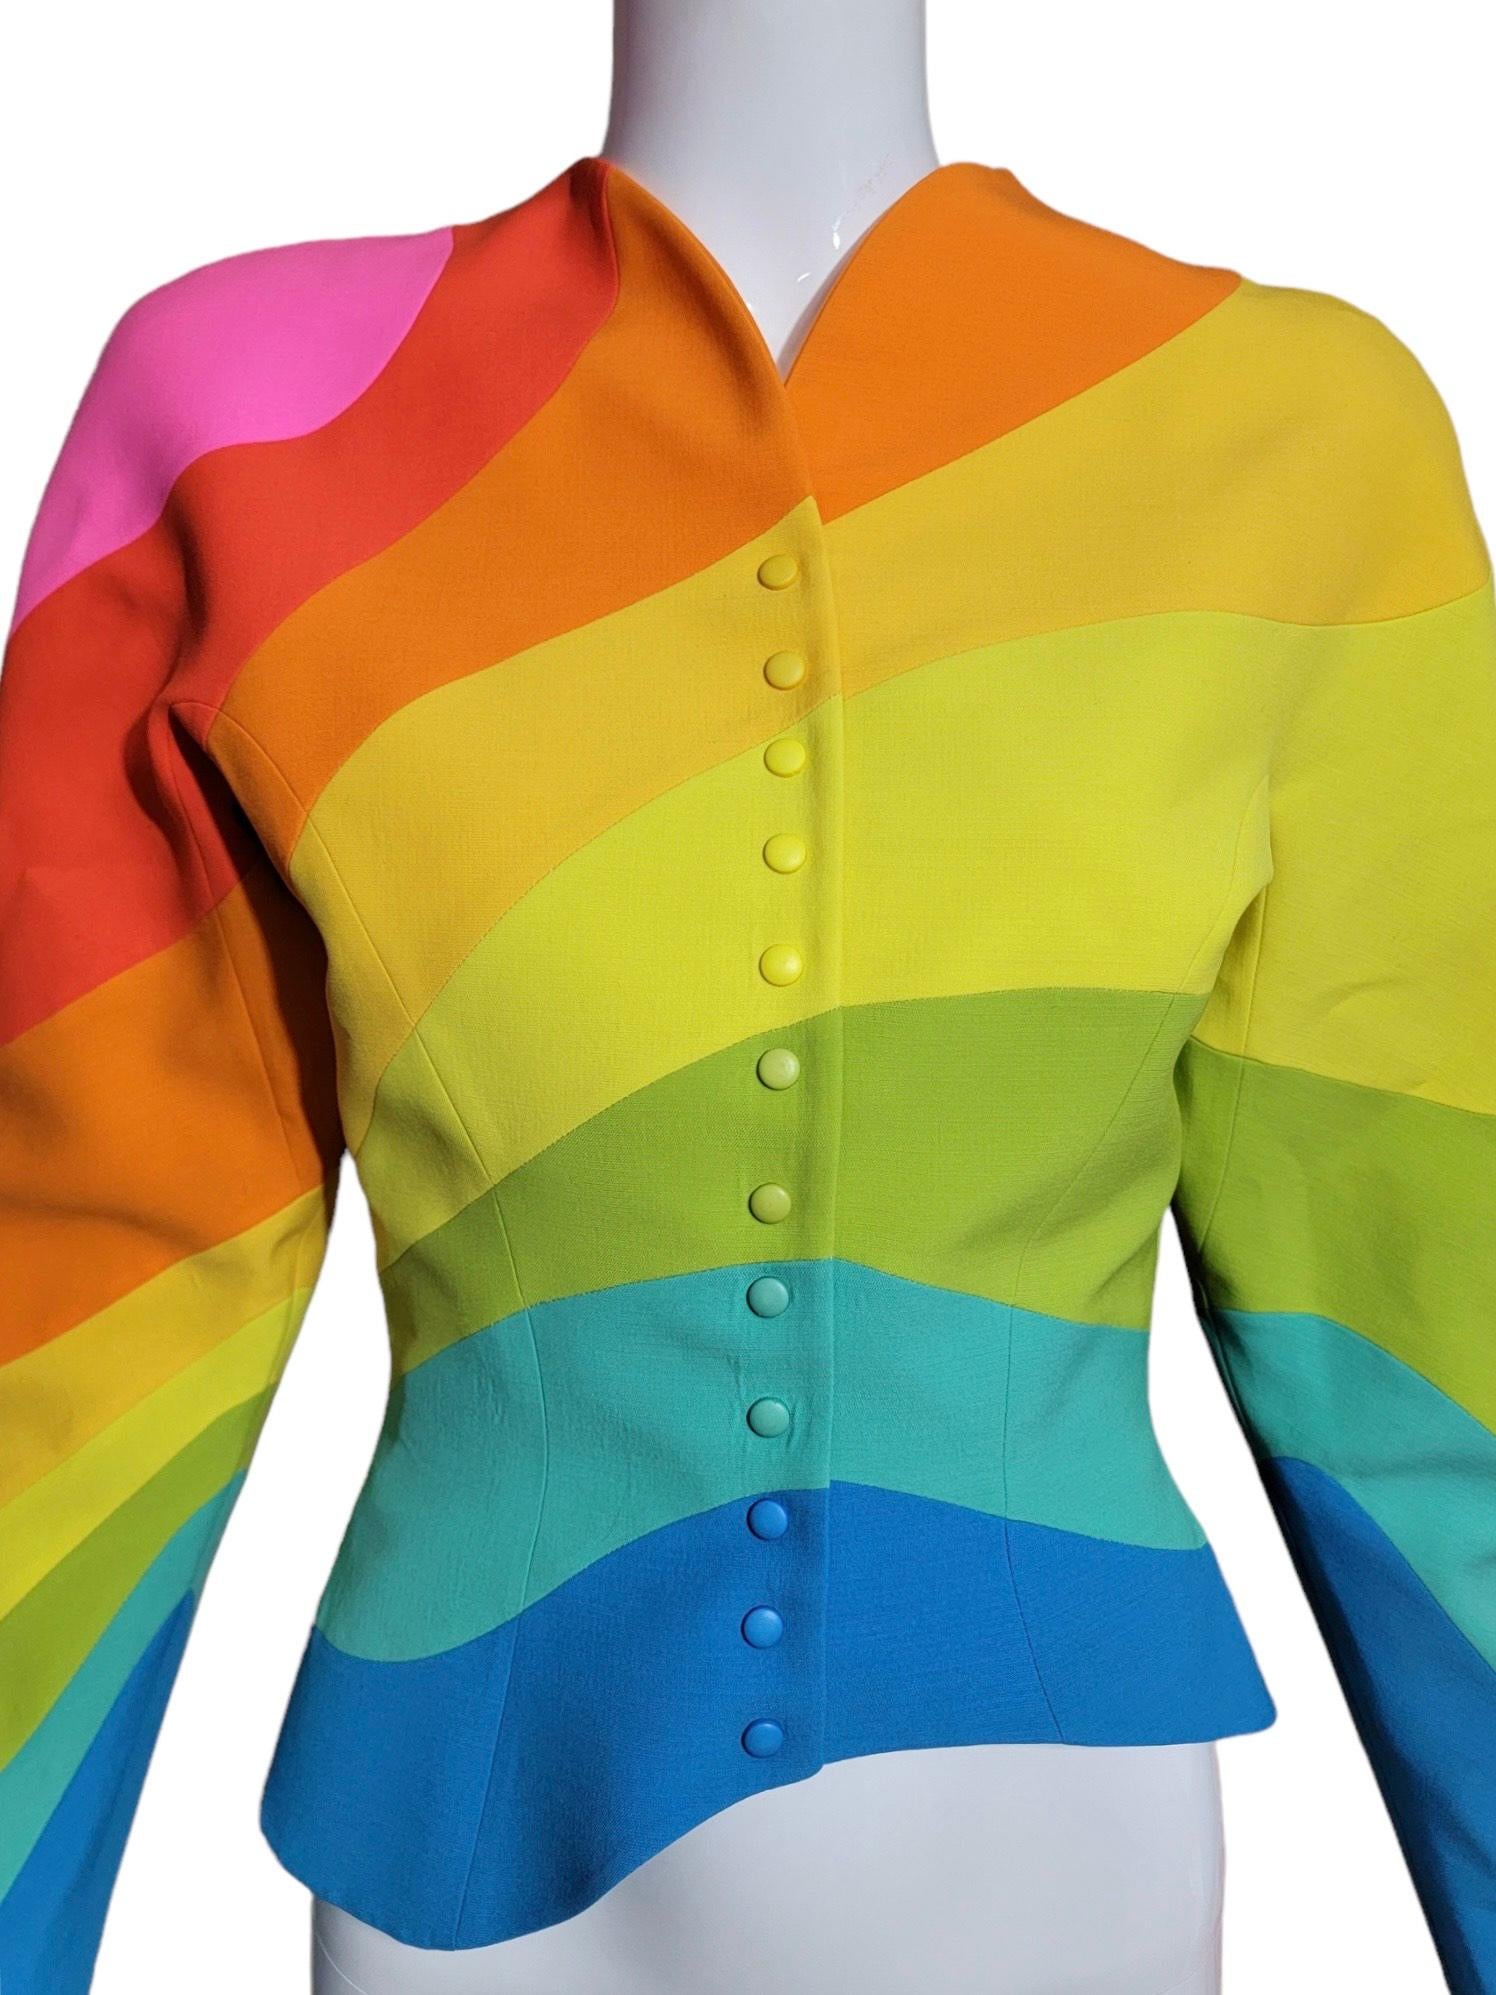 Women's S/S 1990 Thierry Mugler Iconic Rainbow Structured Runway Jacket  For Sale